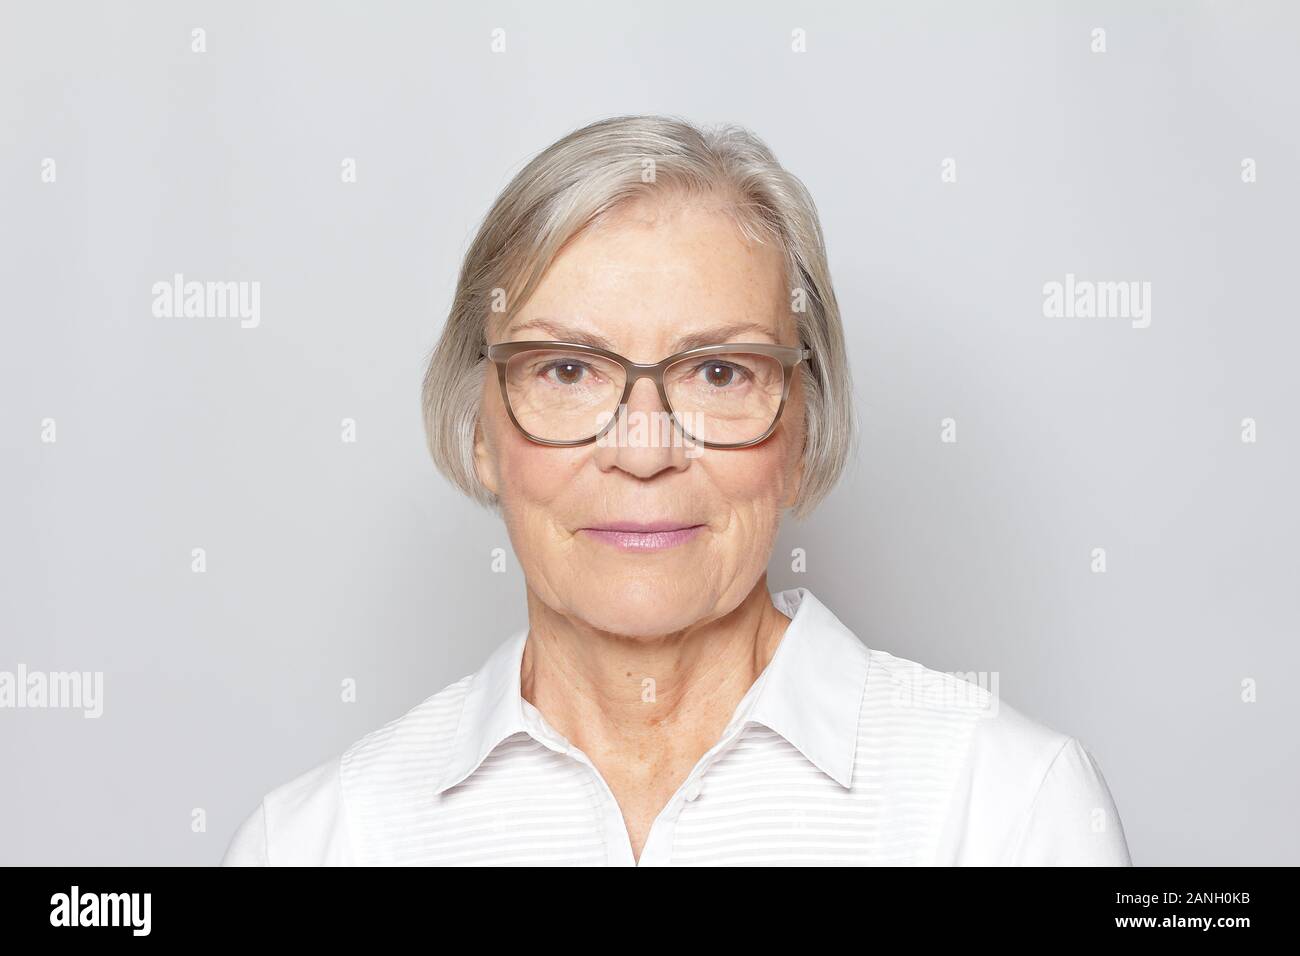 Portrait picture of a senior woman wearing glasses on neutral gray background. Stock Photo